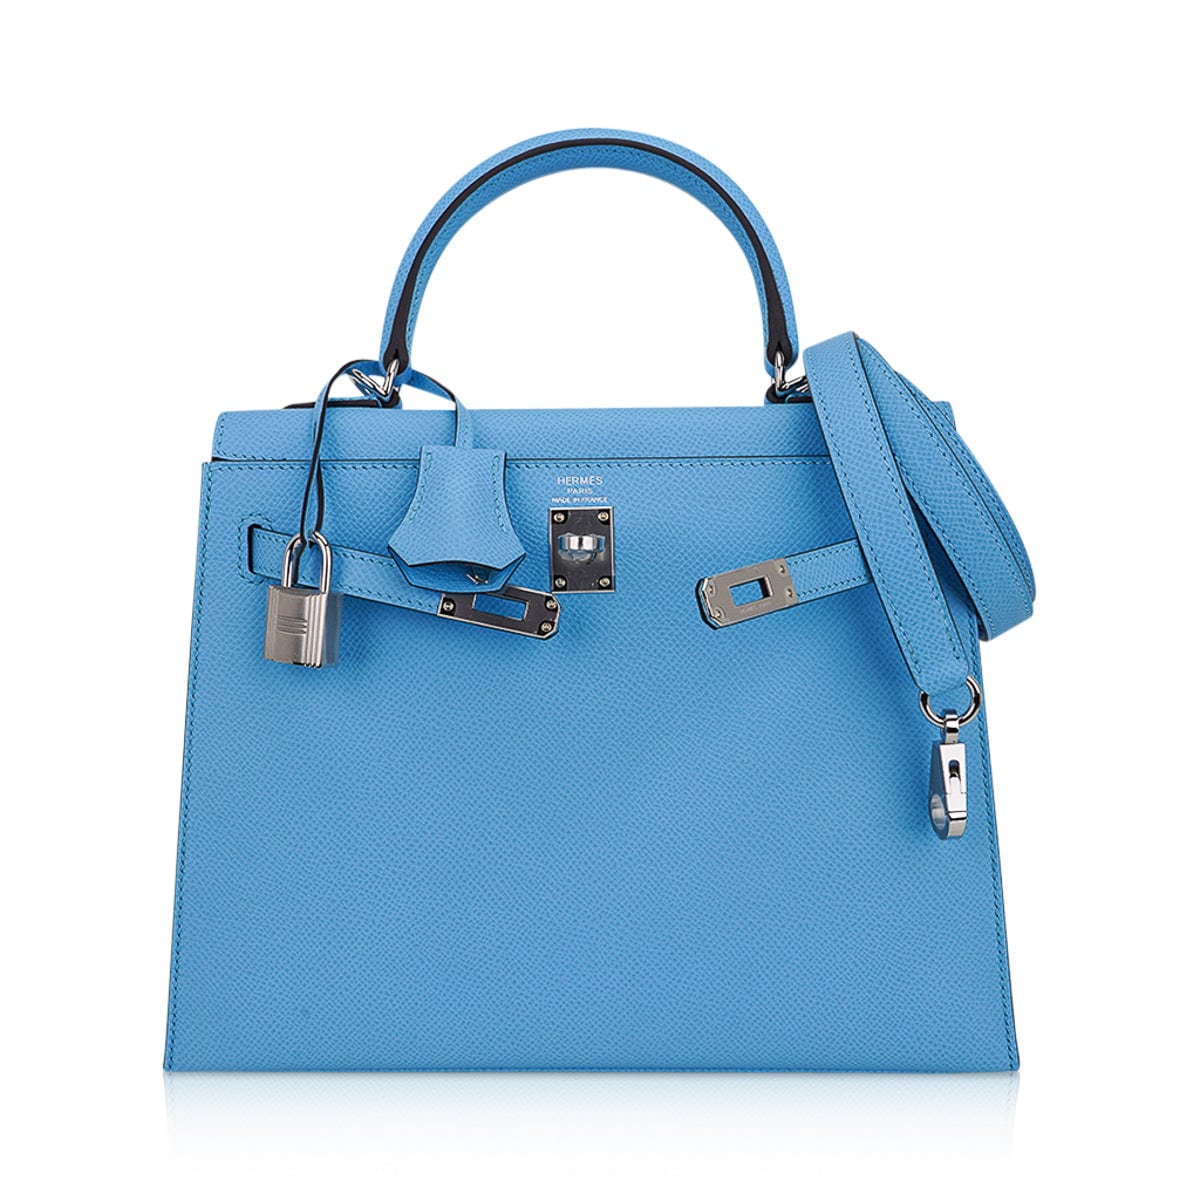 A Guide to Iconic Hermes Kelly Bag Styles - Academy by FASHIONPHILE